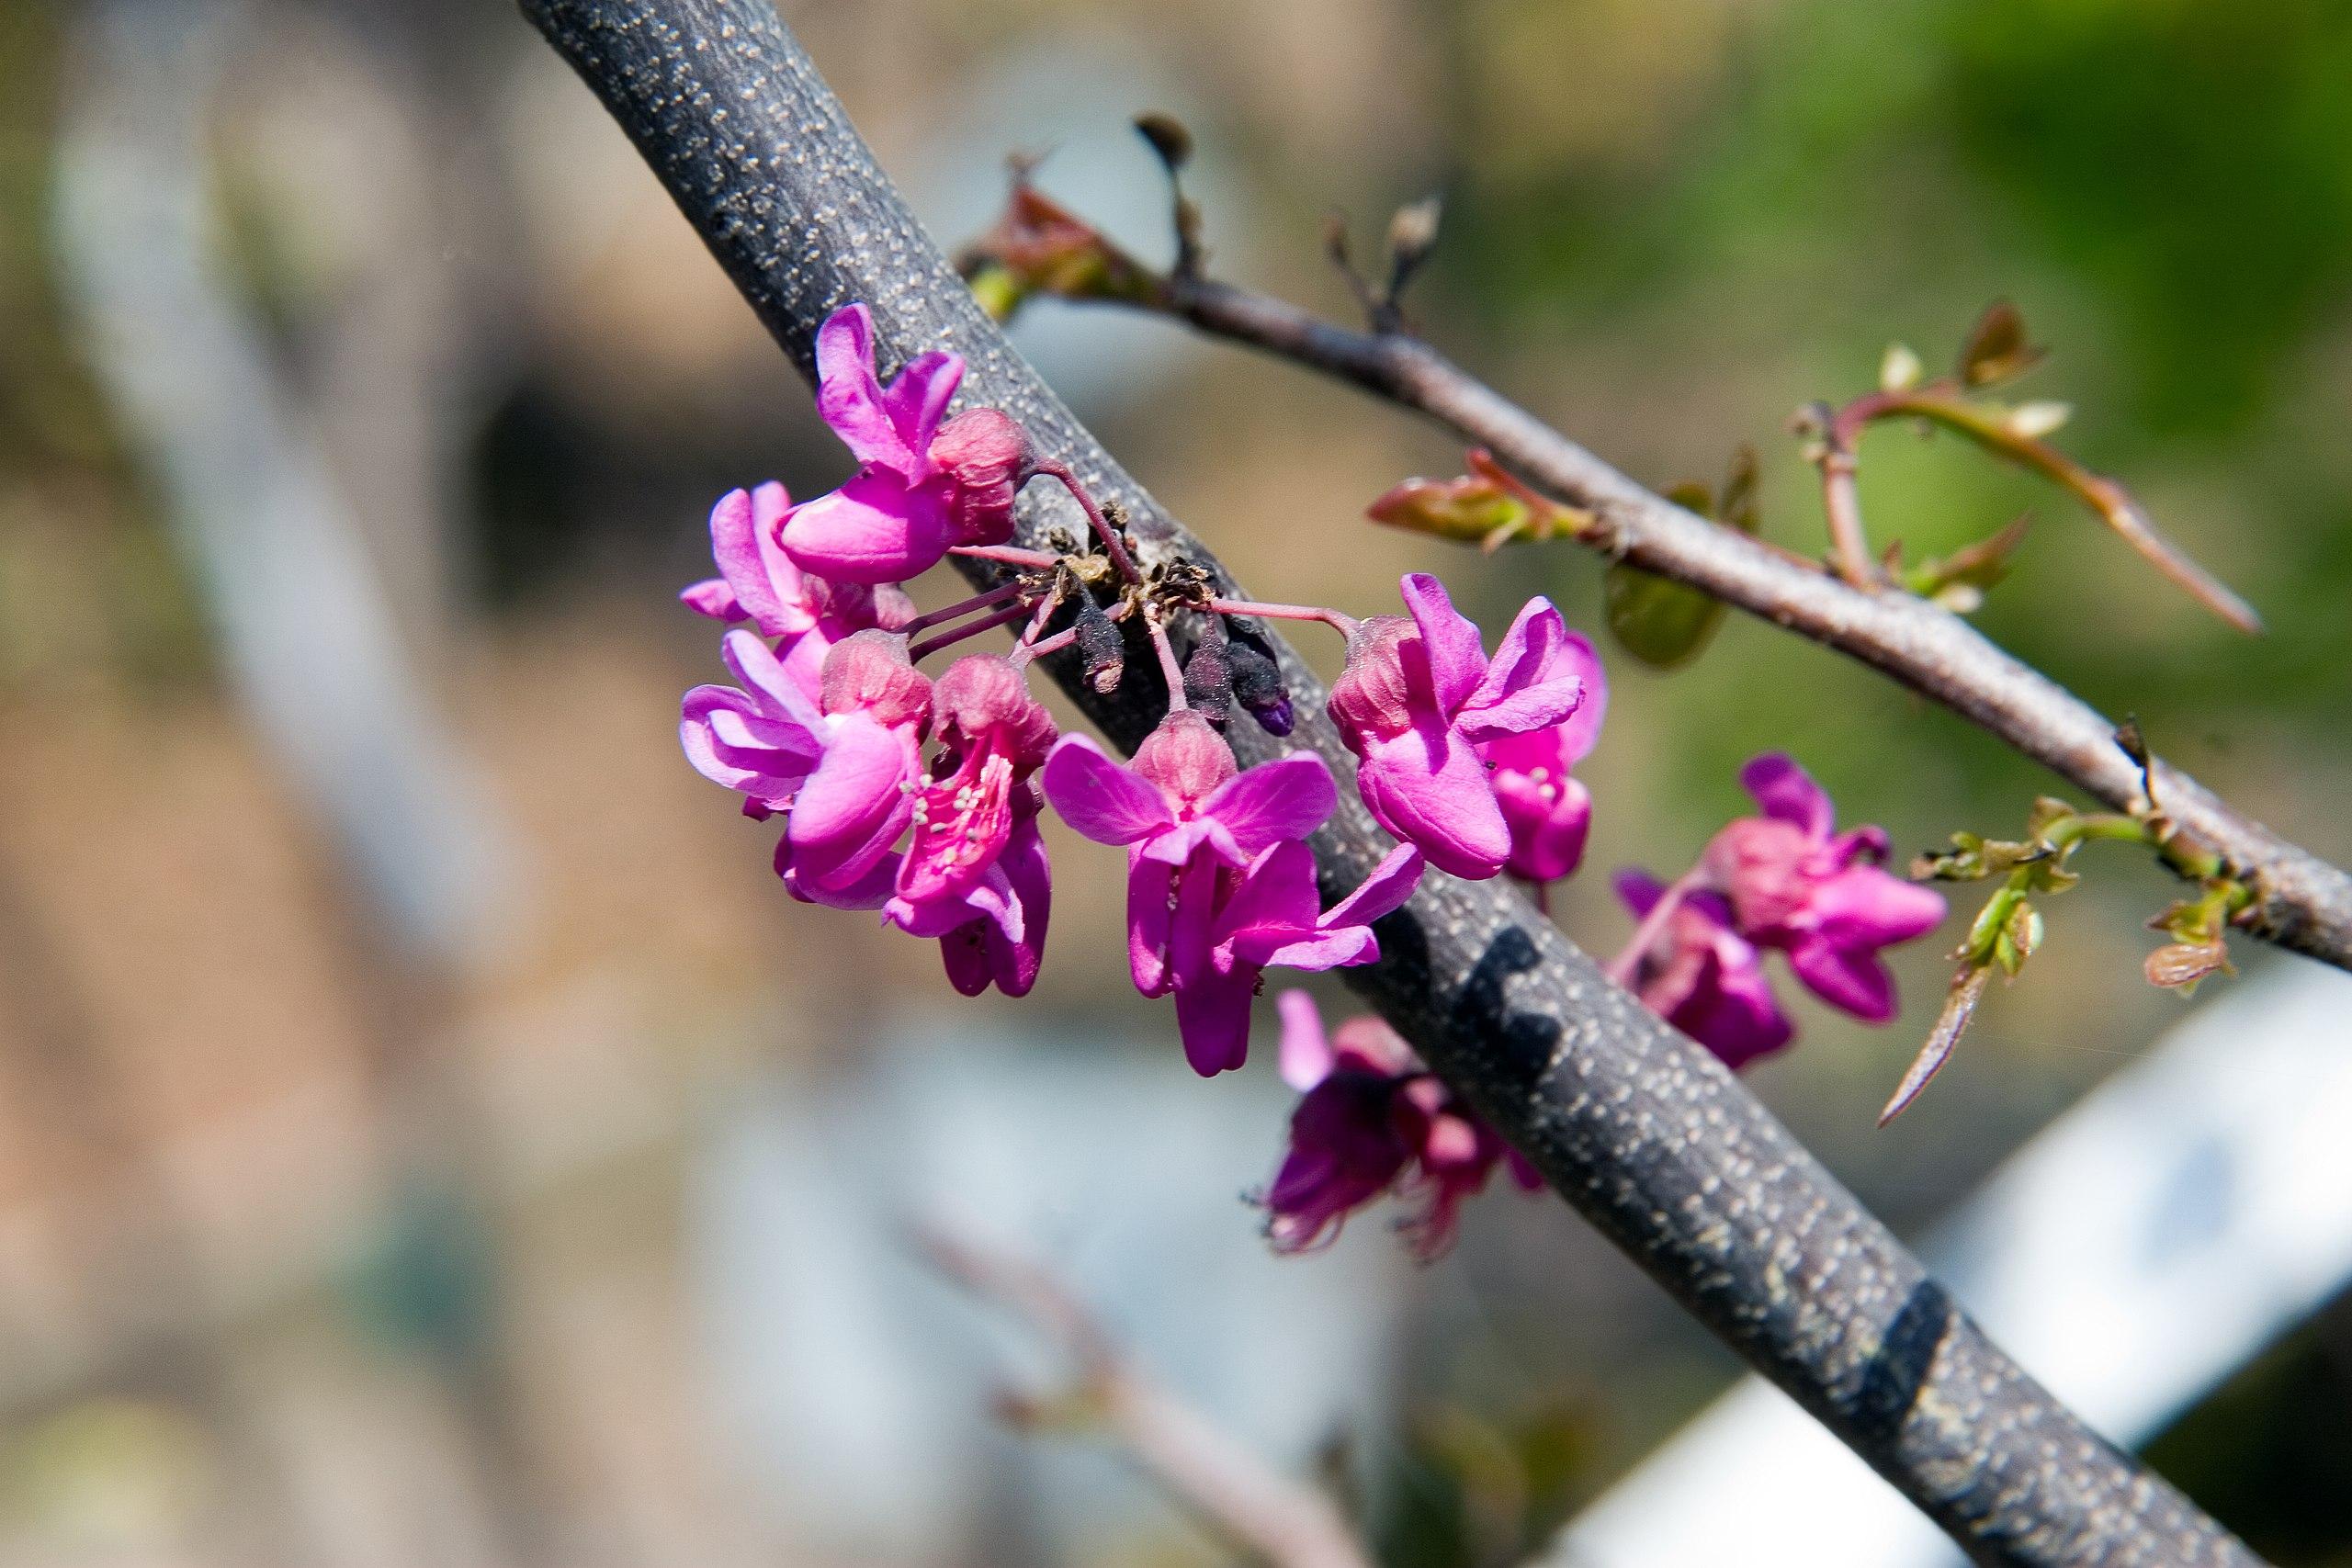 Magenta flowers with buds, pink sepal and pedicel and gray-beige branches.